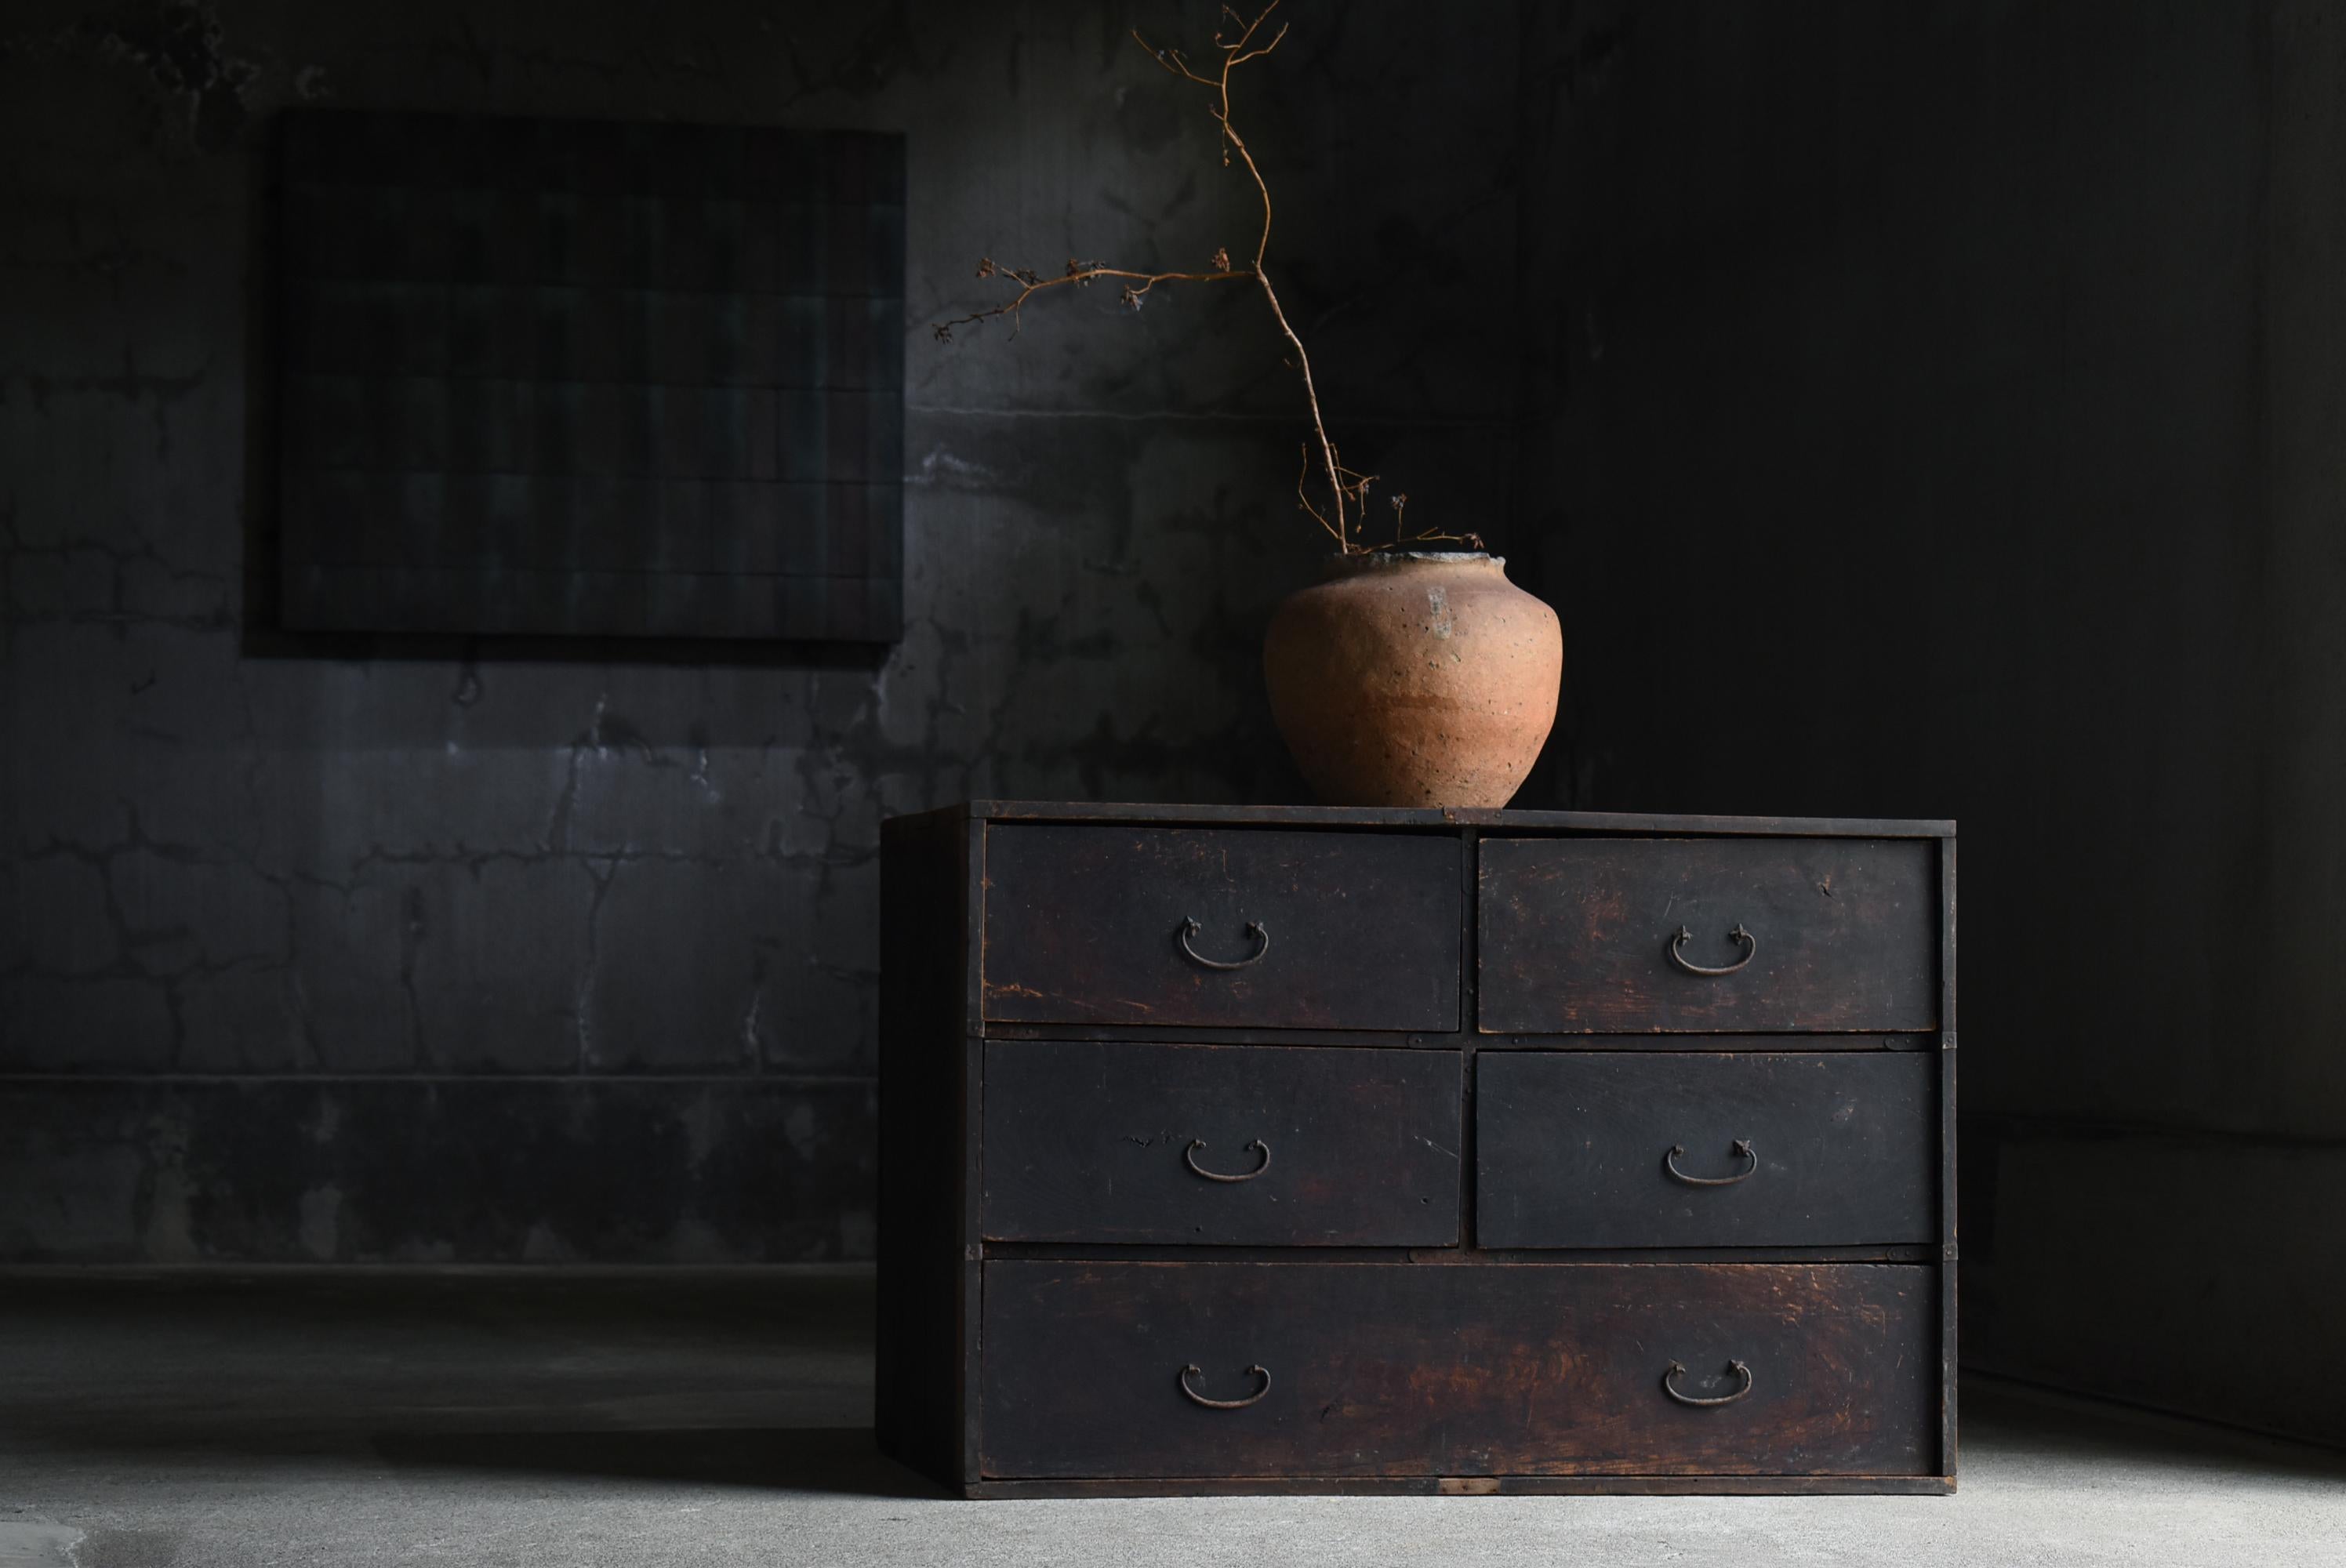 Very old Japanese large drawer storage.
The furniture is from the Meiji period (1860s-1900s).
It is made of zelkova and cedar wood.

The design is simple and lean.
It is a uniquely Japanese simplicity and a very beautiful piece of furniture. It is